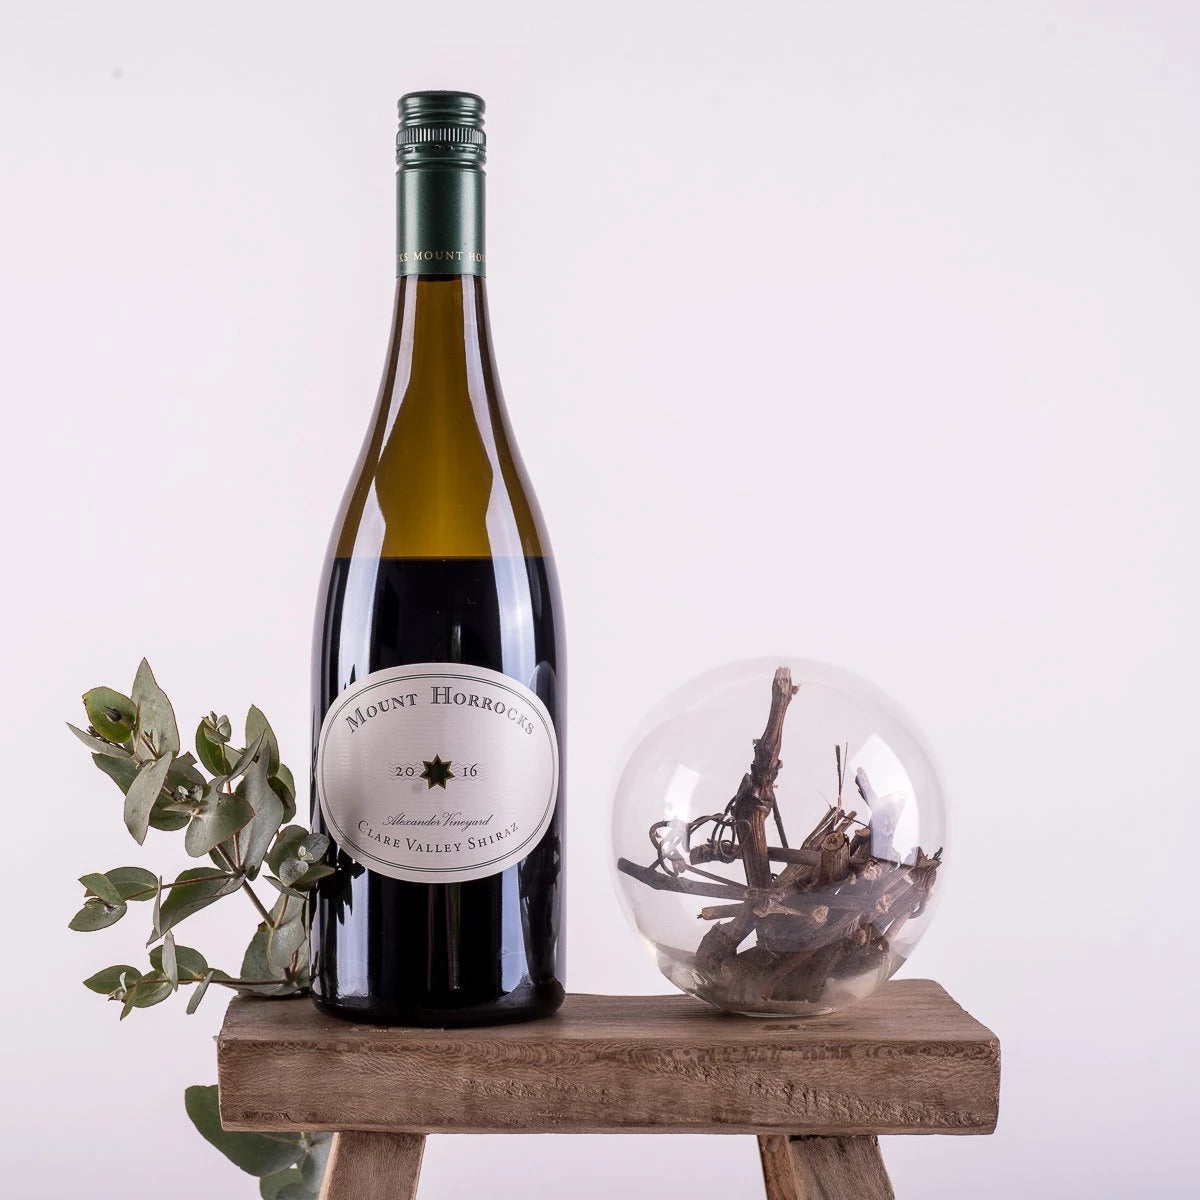 Vine Glass Memento | Australian Made Gifts For Wine Lovers - CoCo Contemporary Connoisseur Gift Store